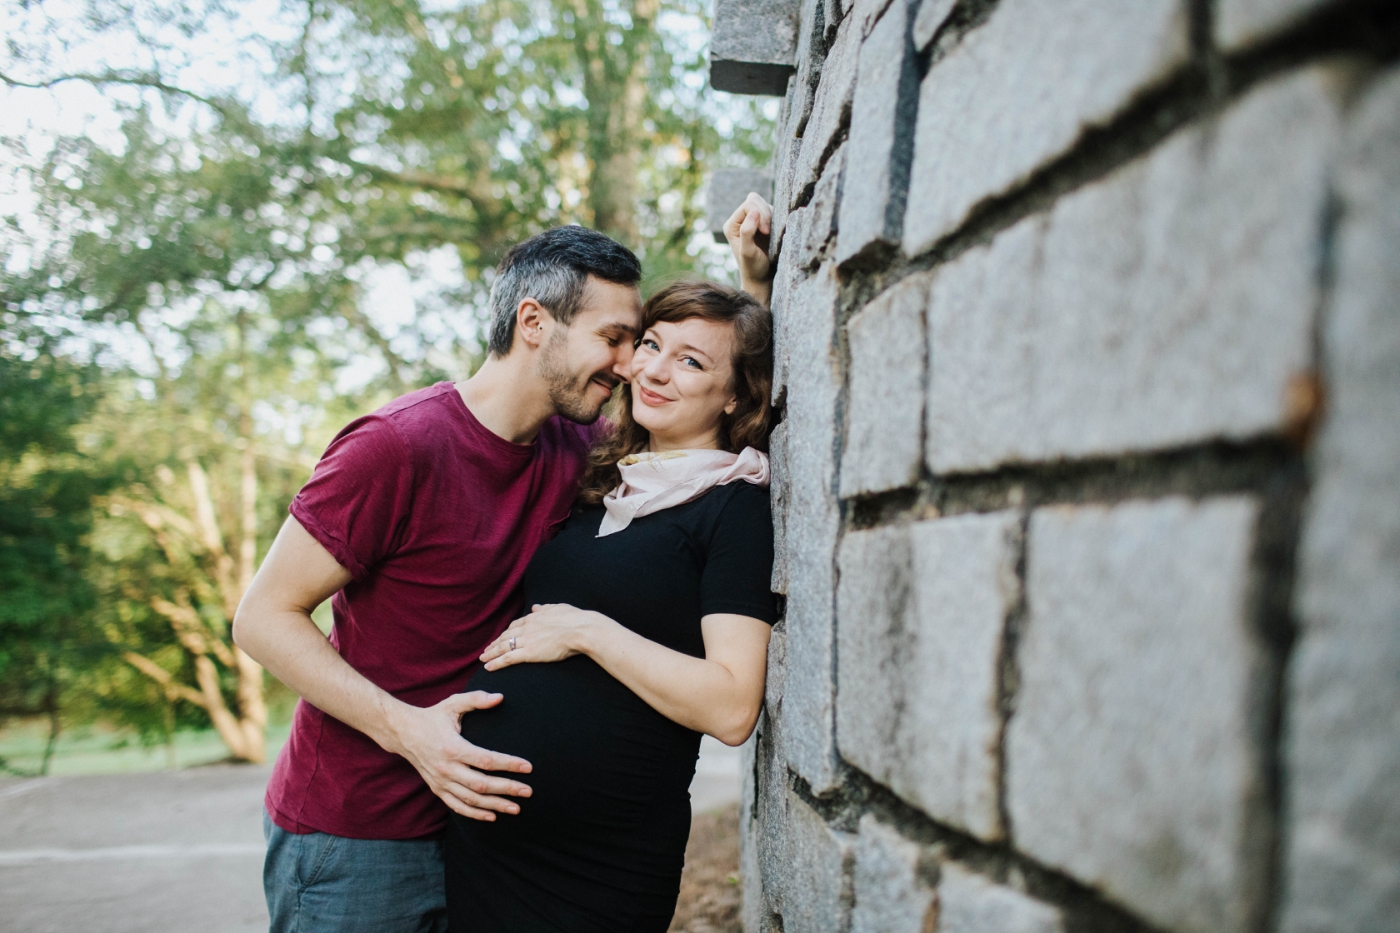 Dudley Park maternity session